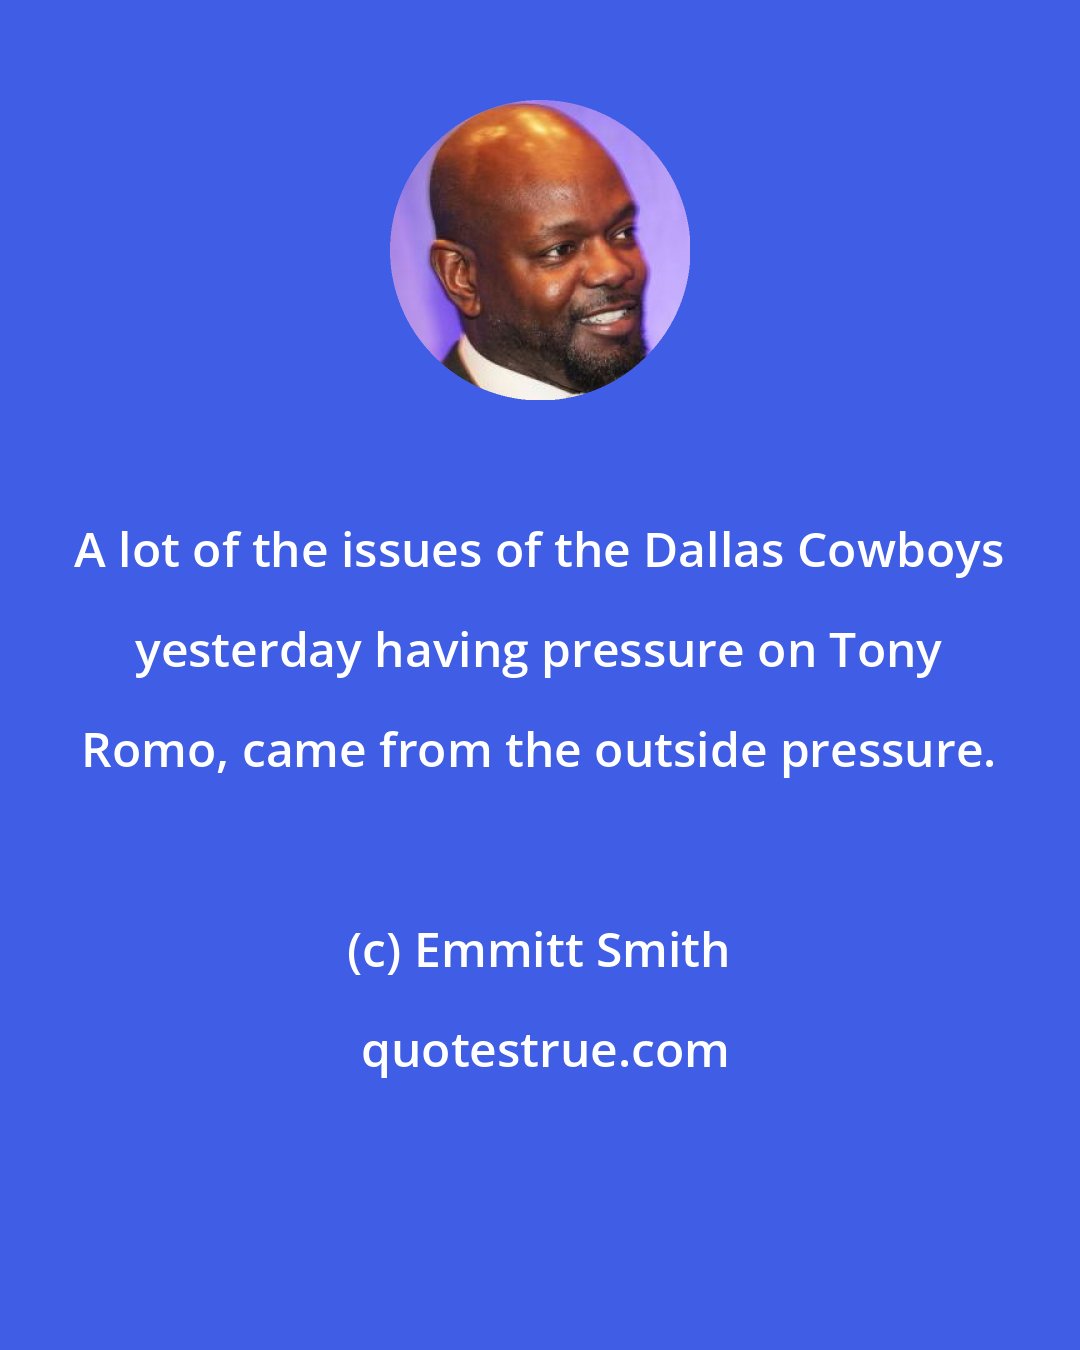 Emmitt Smith: A lot of the issues of the Dallas Cowboys yesterday having pressure on Tony Romo, came from the outside pressure.